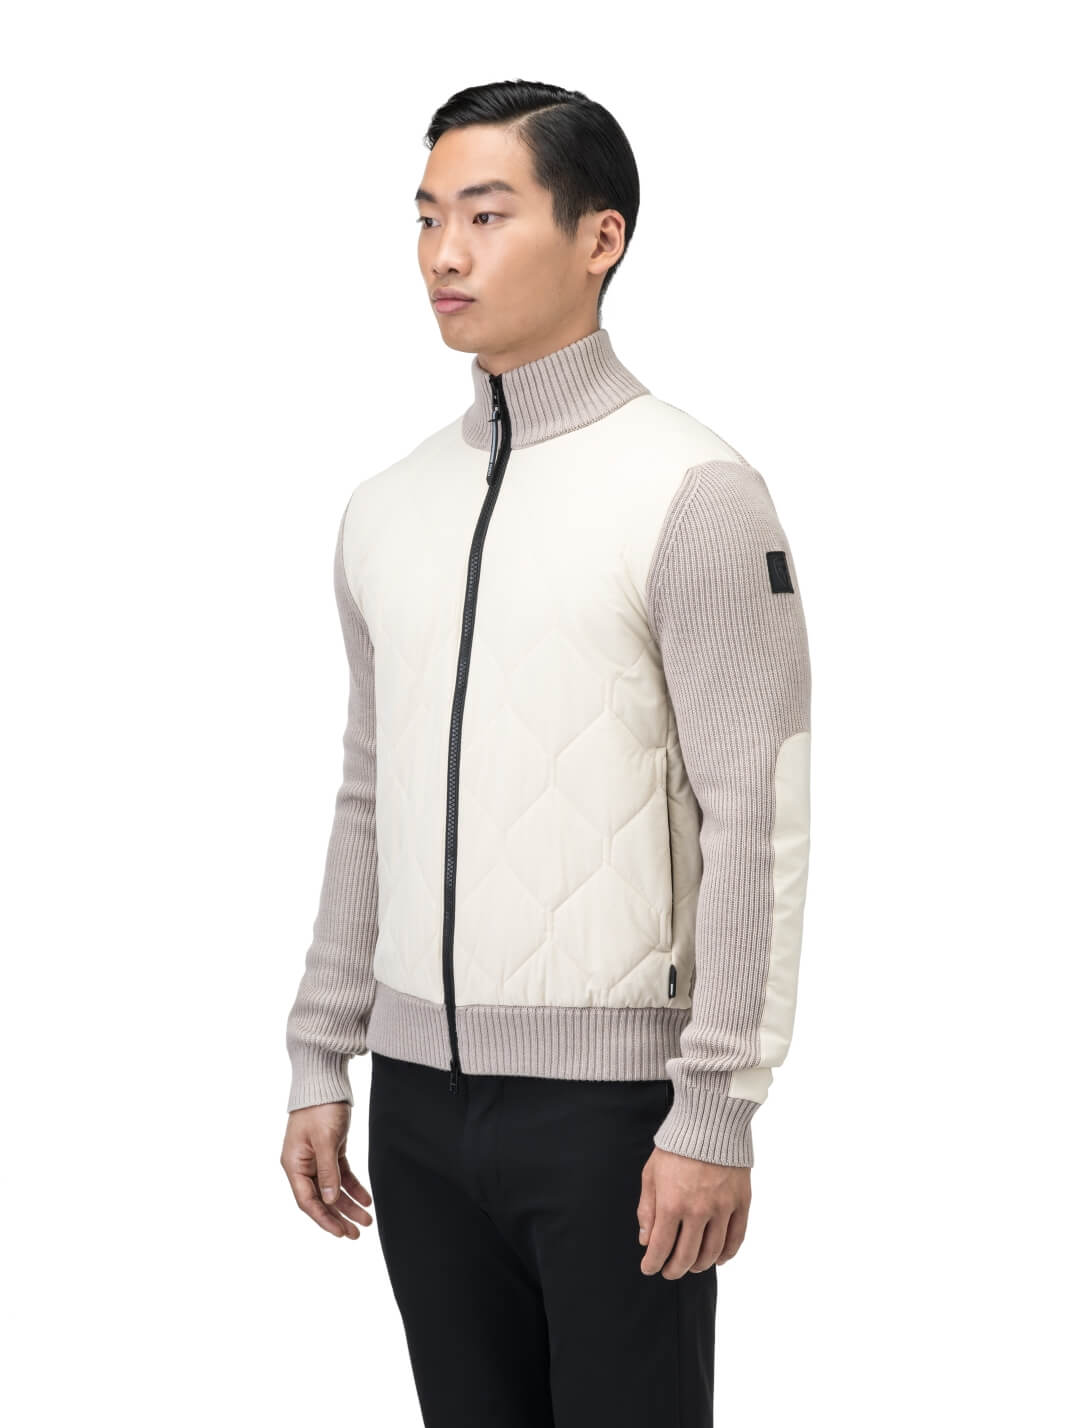 Ero Men's Tailored Hybrid Sweater in hip length, PrimaLoft Gold Insulation Active+, Durable 4-Way Stretch Weave quilted torso, Merino wool knit collar, sleeves, back, and cuffs, two-way front zipper, and hidden waist pockets, in Wheat